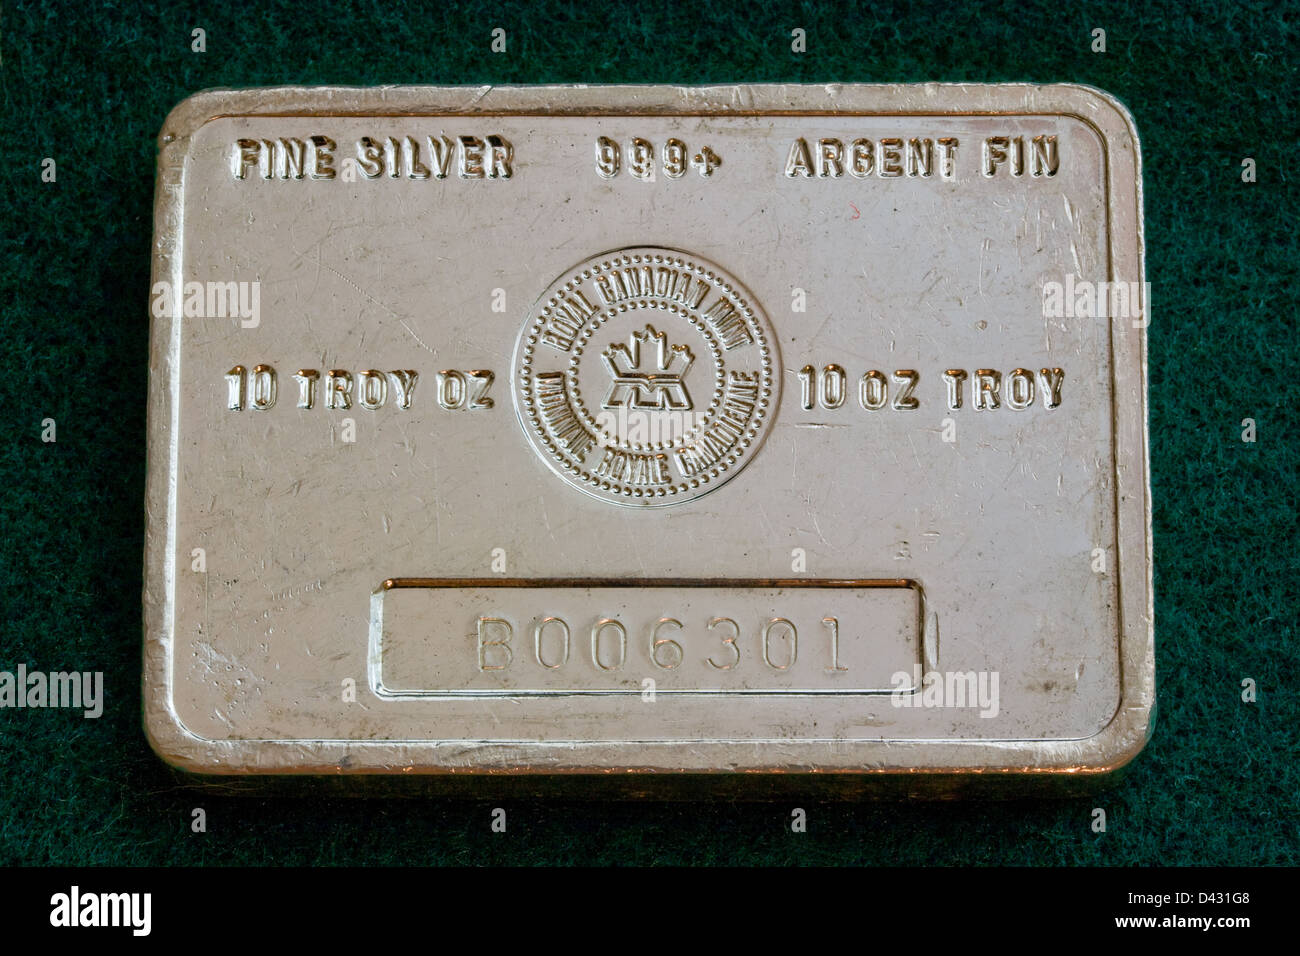 Ten Troy Ounce Silver Bullion Bar - Unique Serial Number Stock Photo